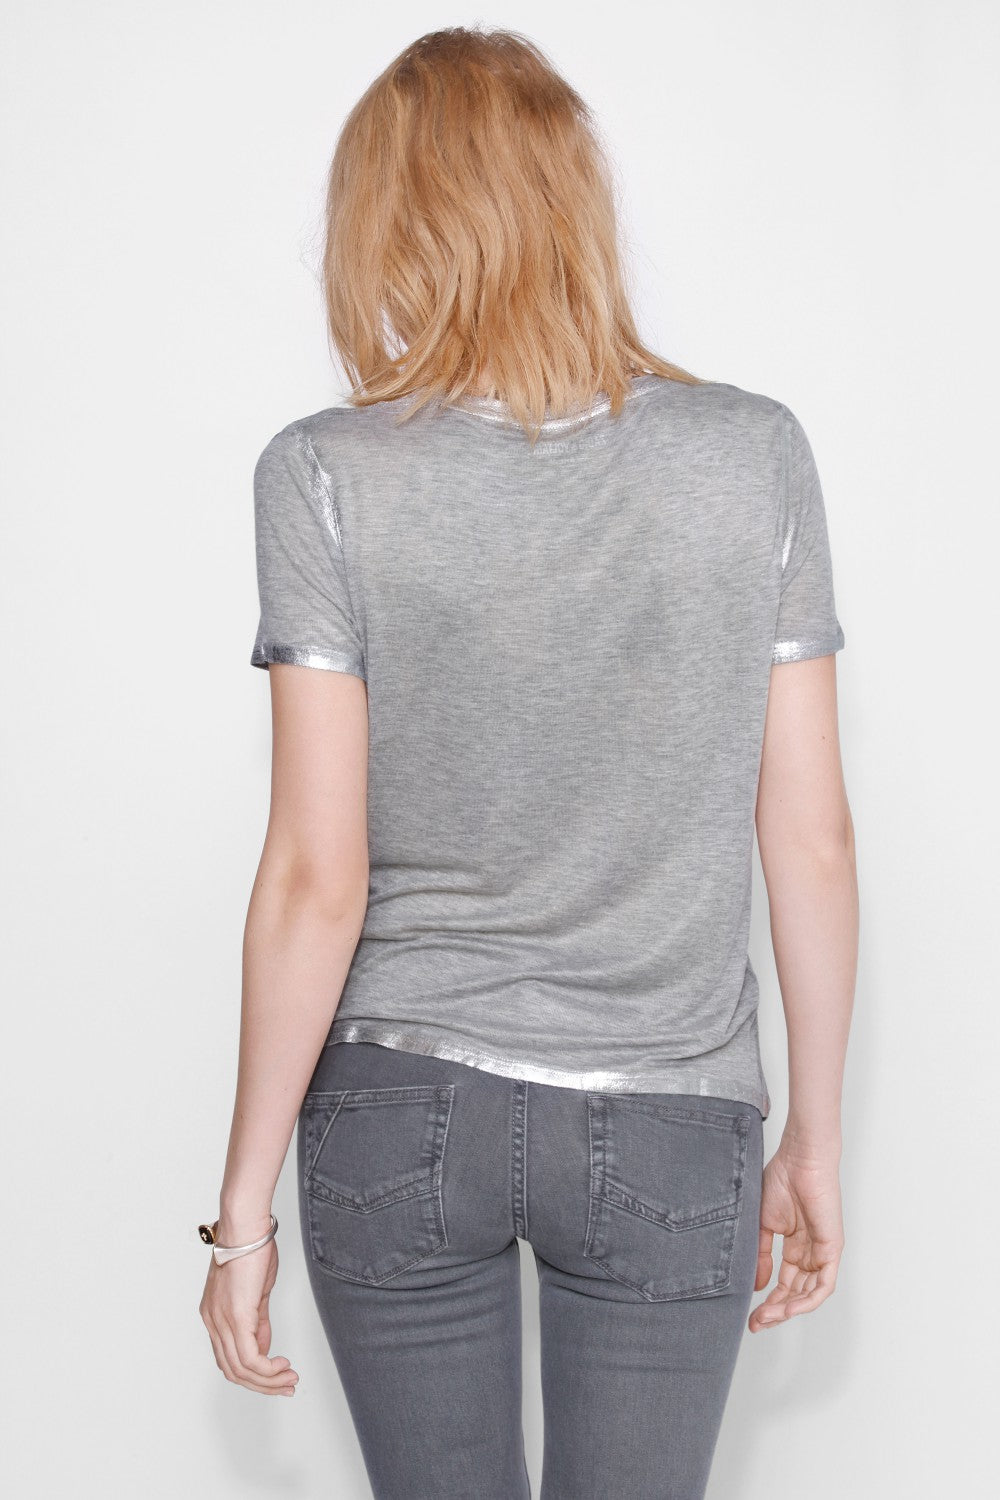 Zadig & Voltaire Tino Foil Tee